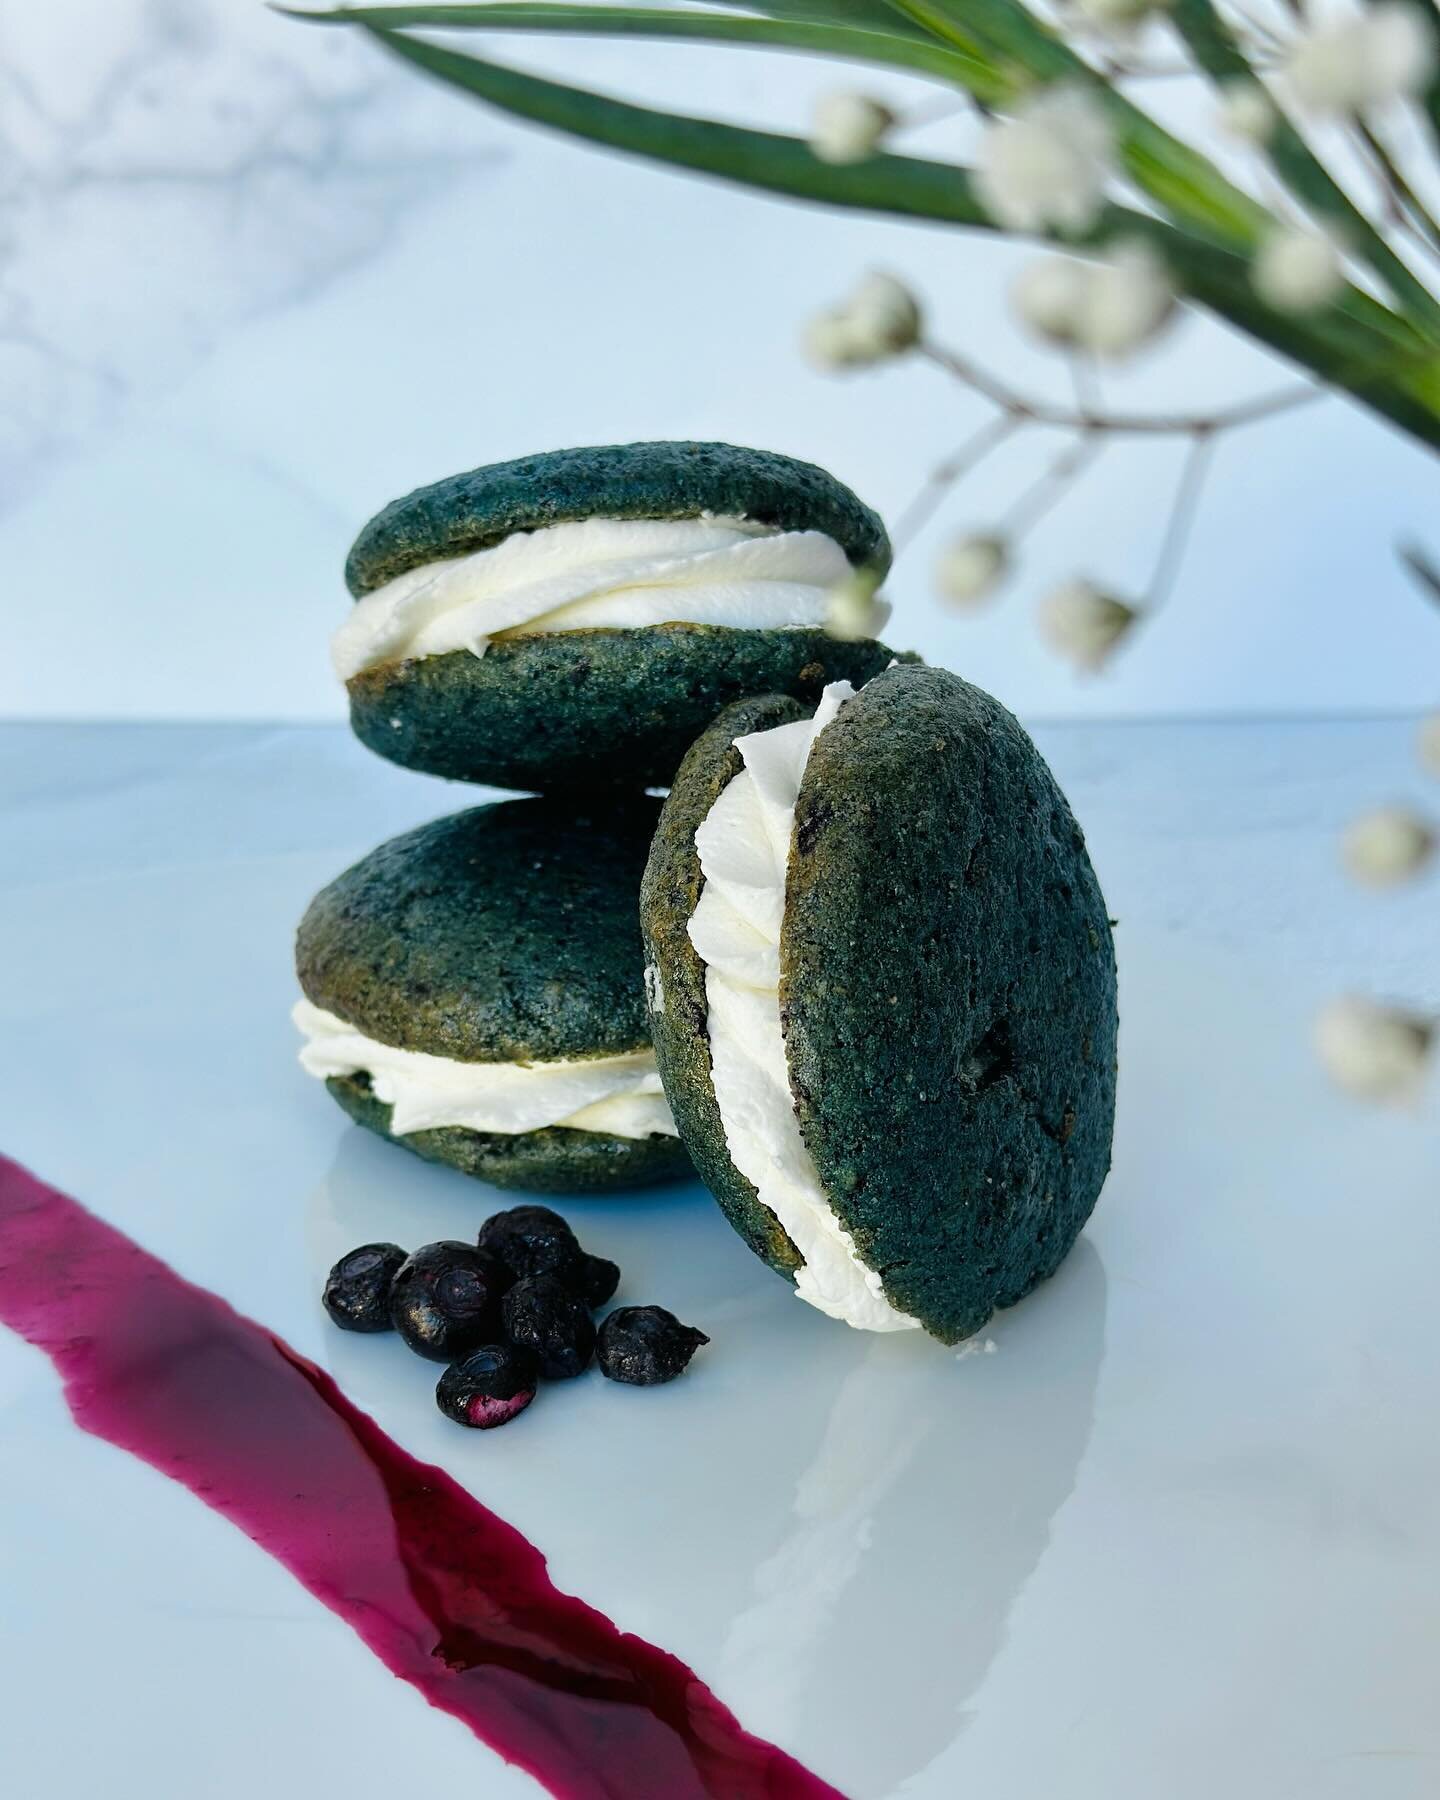 B L U B E R R Y  L E M O N 
W H O O P I E  P I E

Ignore the falling snow out there ❄️ Come celebrate the spring solstice with a blueberry lemon whoopie pie!

Fluffy blueberry cookies made with freeze dried blueberries and extract, filled with bluebe